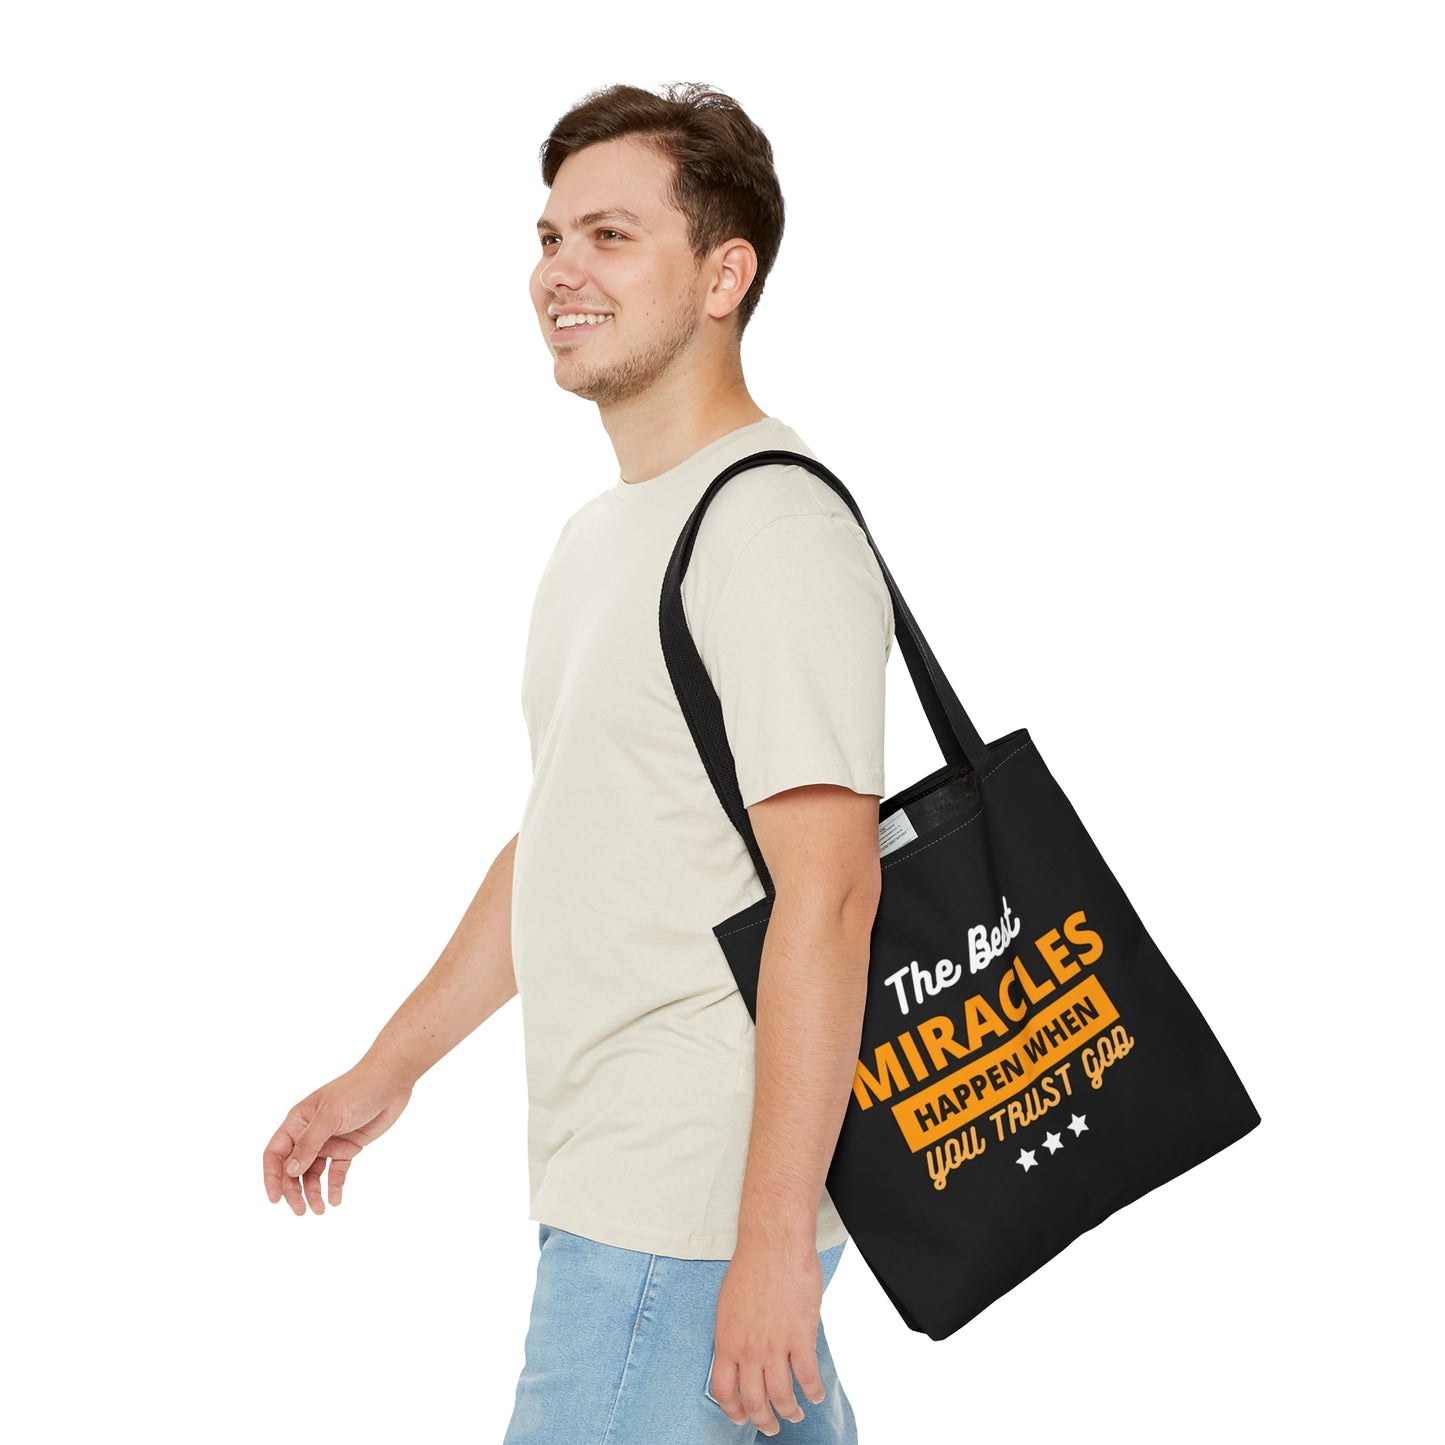 The Best Miracles Happen When You Trust God Christian Tote Bag Printify